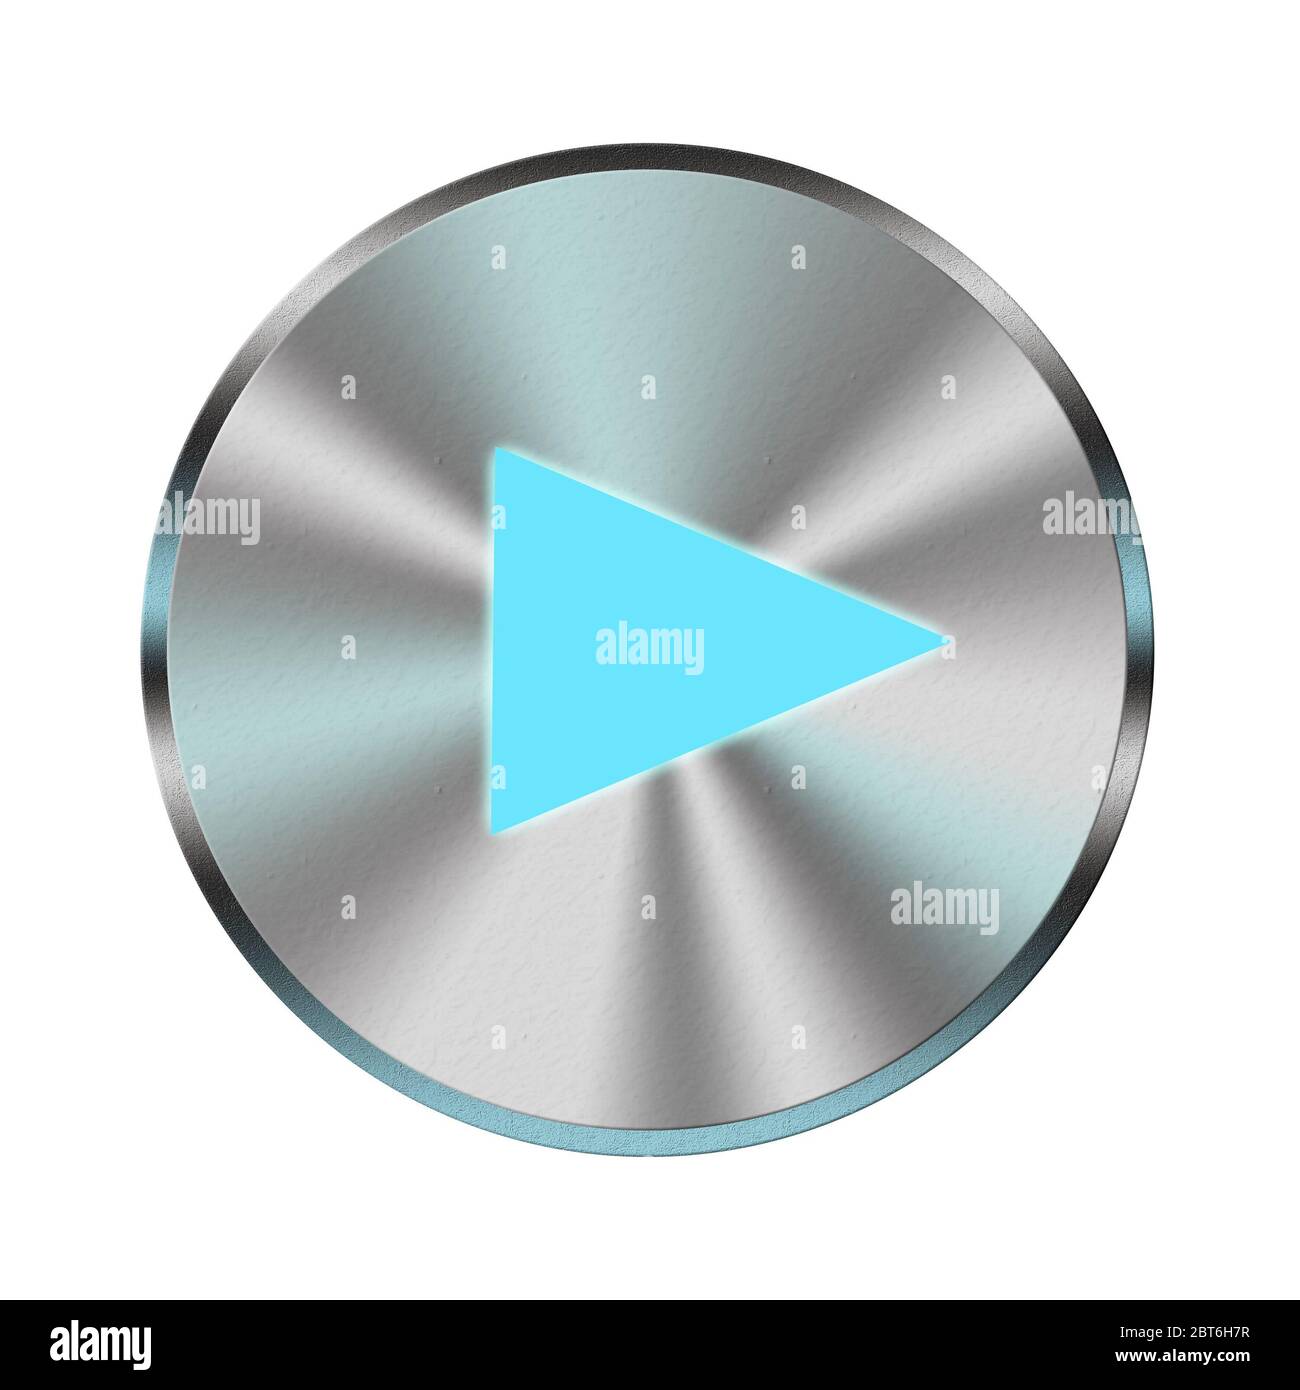 metal play button playback of the songs multimedia icon Stock Photo